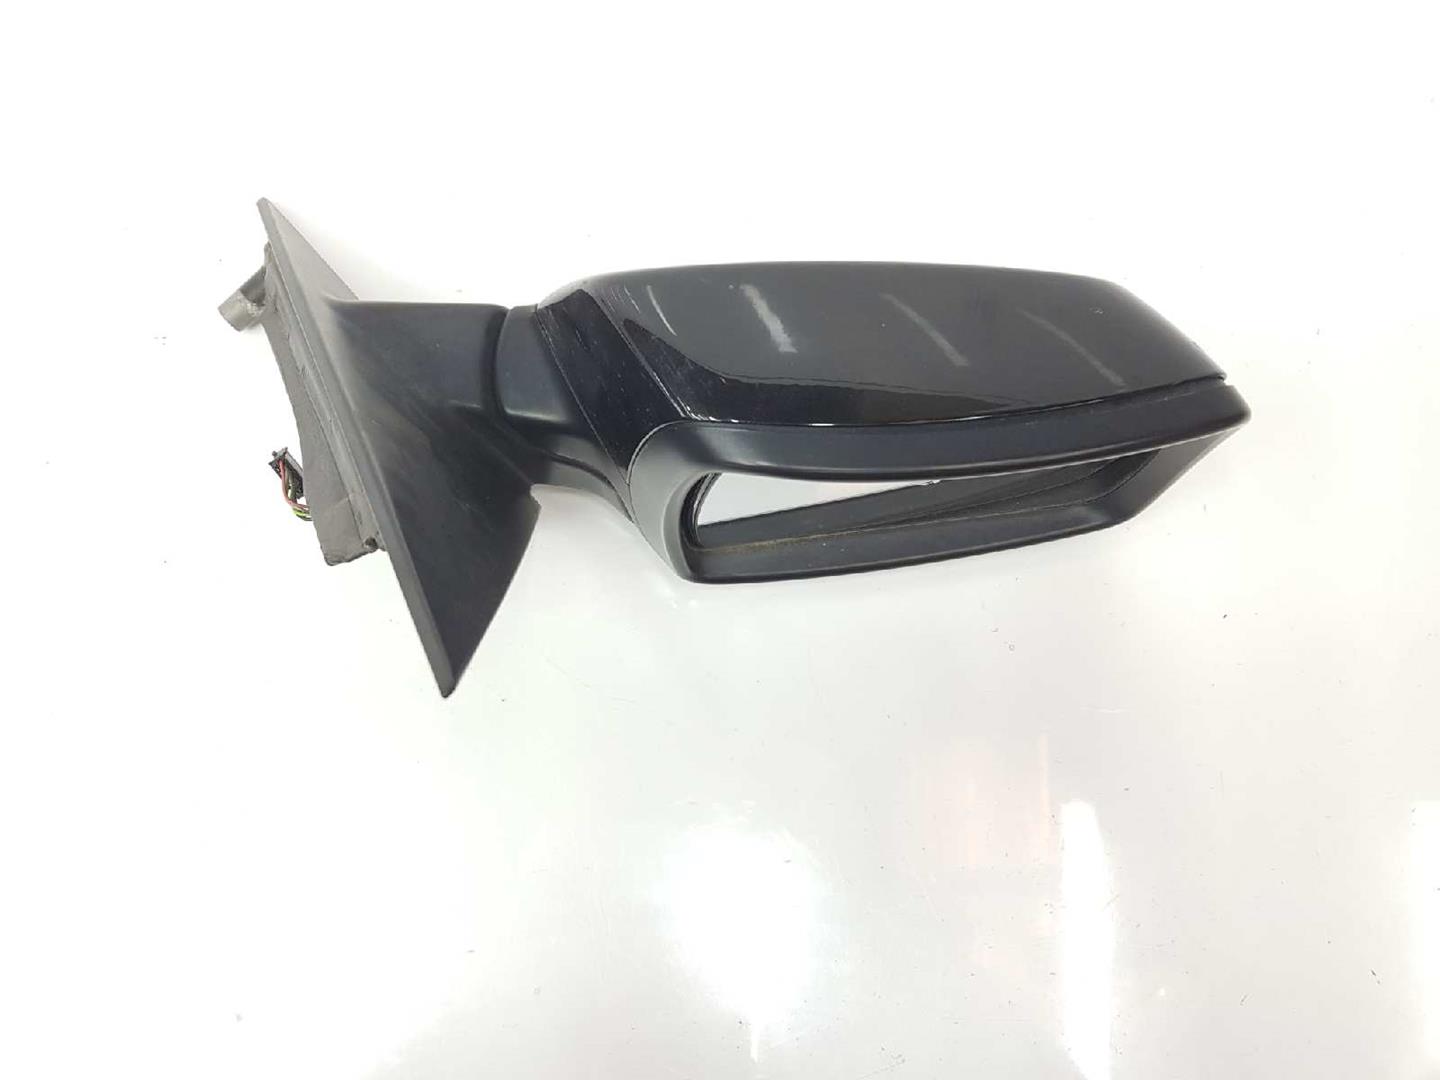 BMW X3 E83 (2003-2010) Right Side Wing Mirror 51163448132, 51163448132, 5PINES 19653289